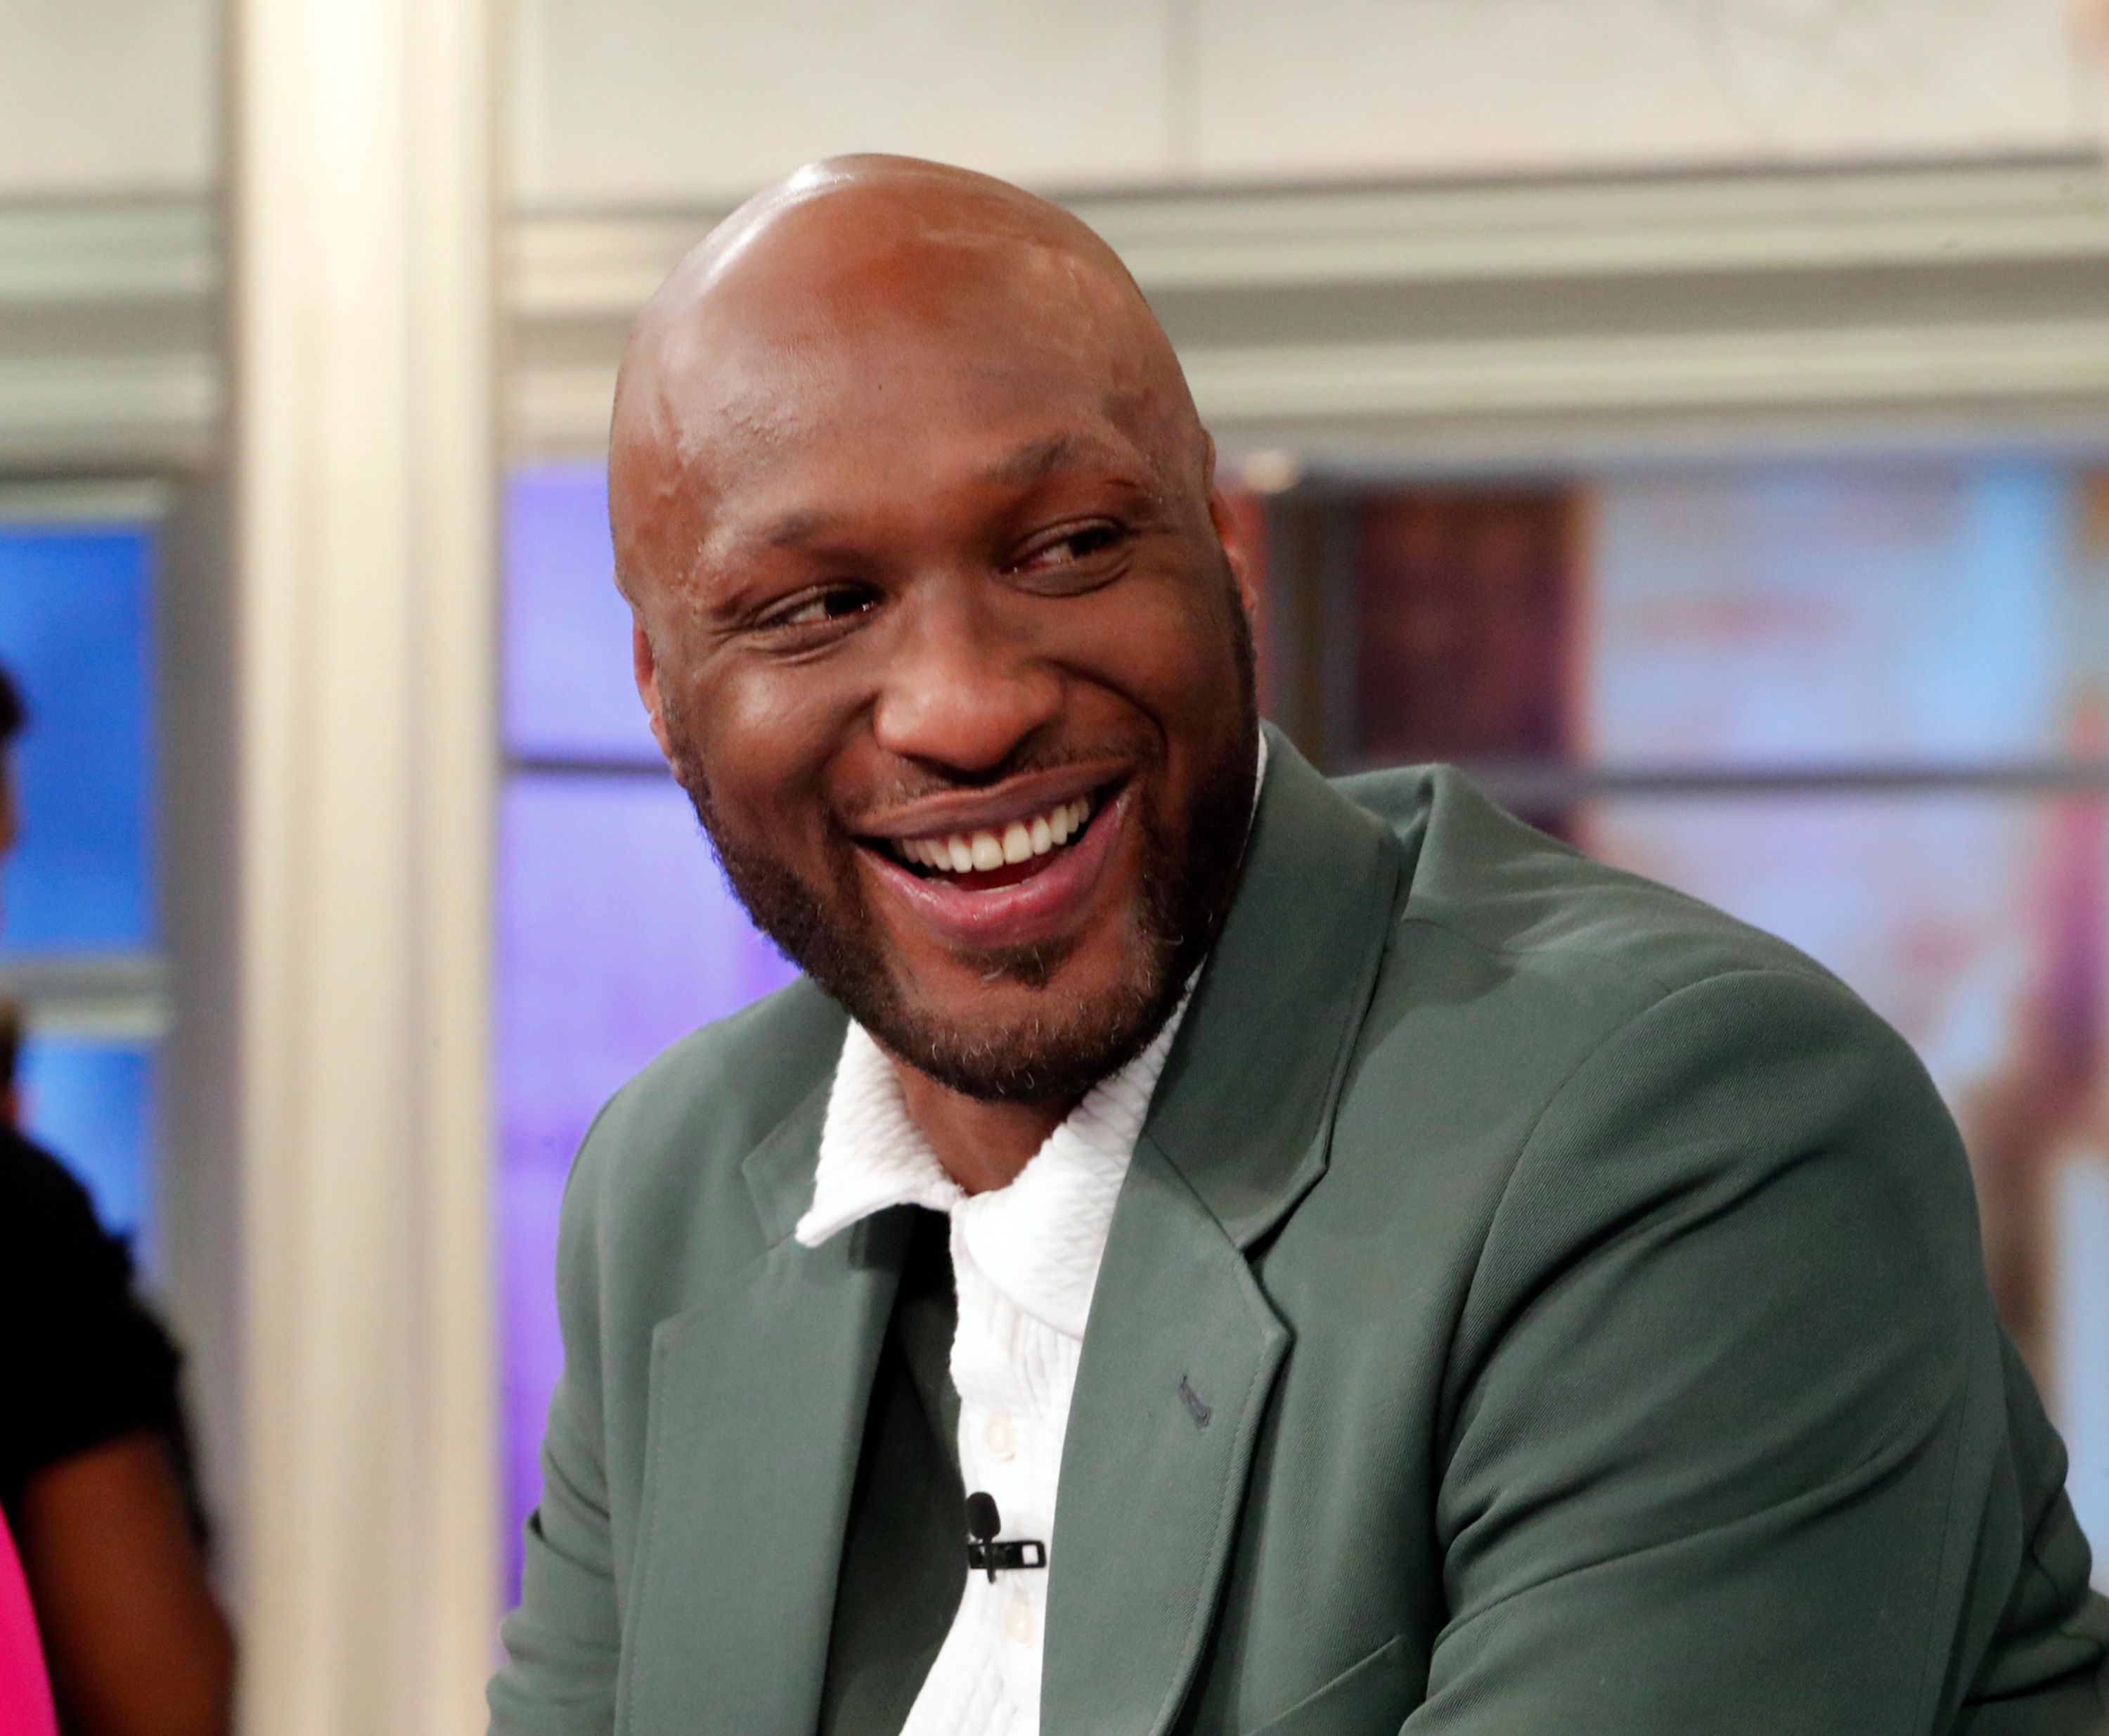 Lamar Odom on "The View" on May 28. 2019. | Source: Getty Images